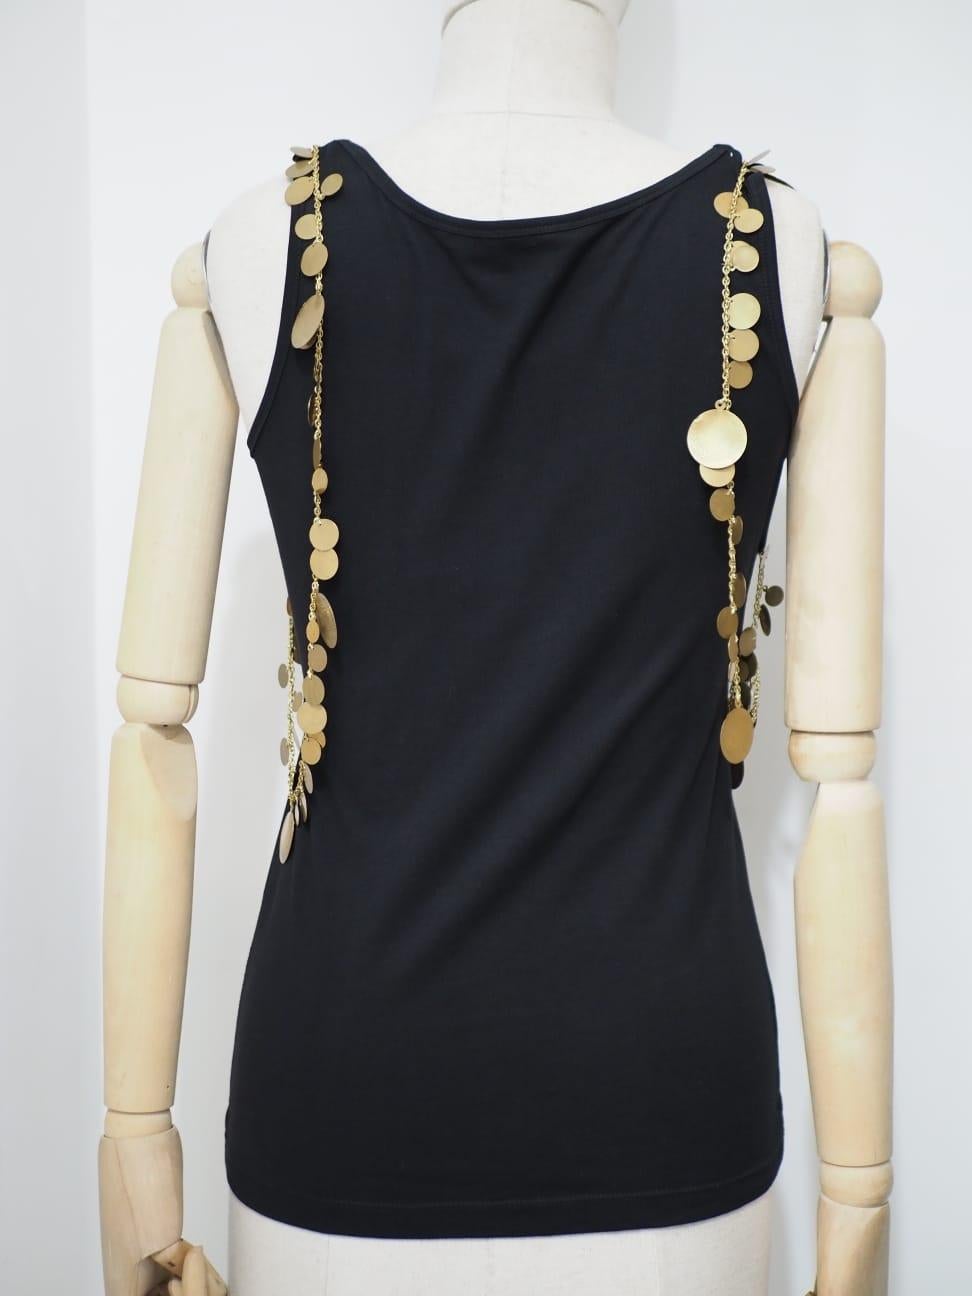 Givenchy black with gold tone medals top In Excellent Condition For Sale In Capri, IT